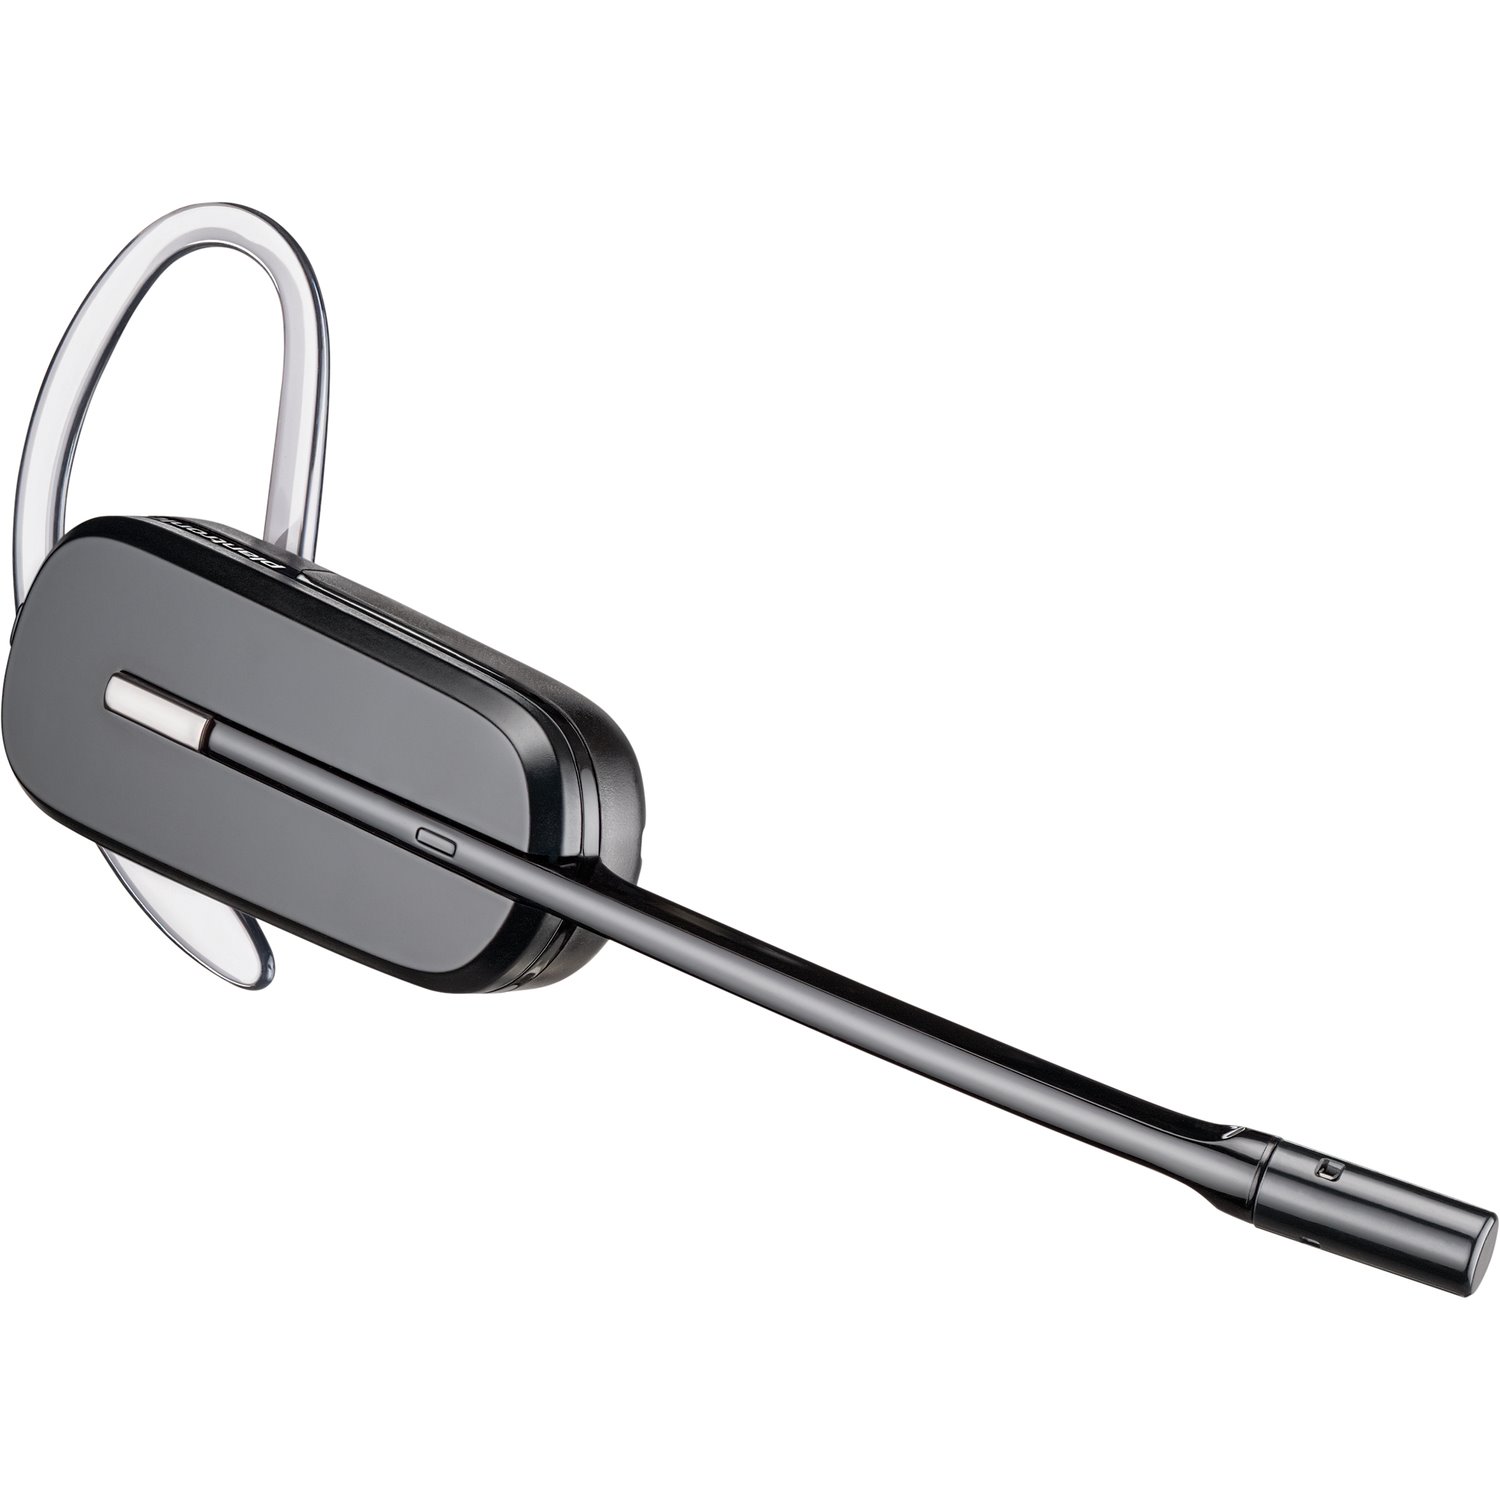 Plantronics CS540 Wireless Over-the-ear, Over-the-head, Behind-the-neck Mono Earset - Black